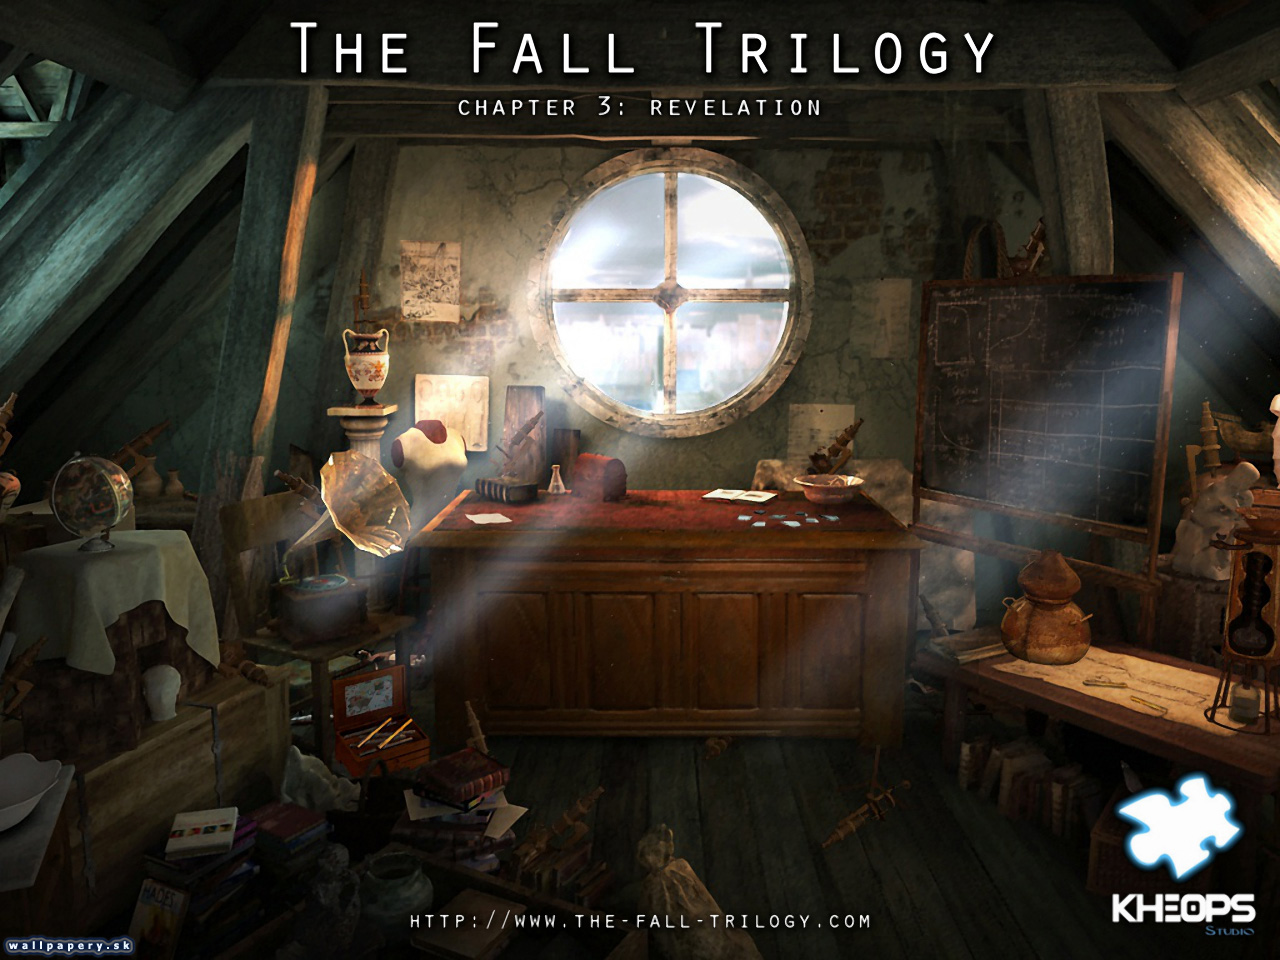 The Fall Trilogy - Chapter 3: Revelation - wallpaper 11